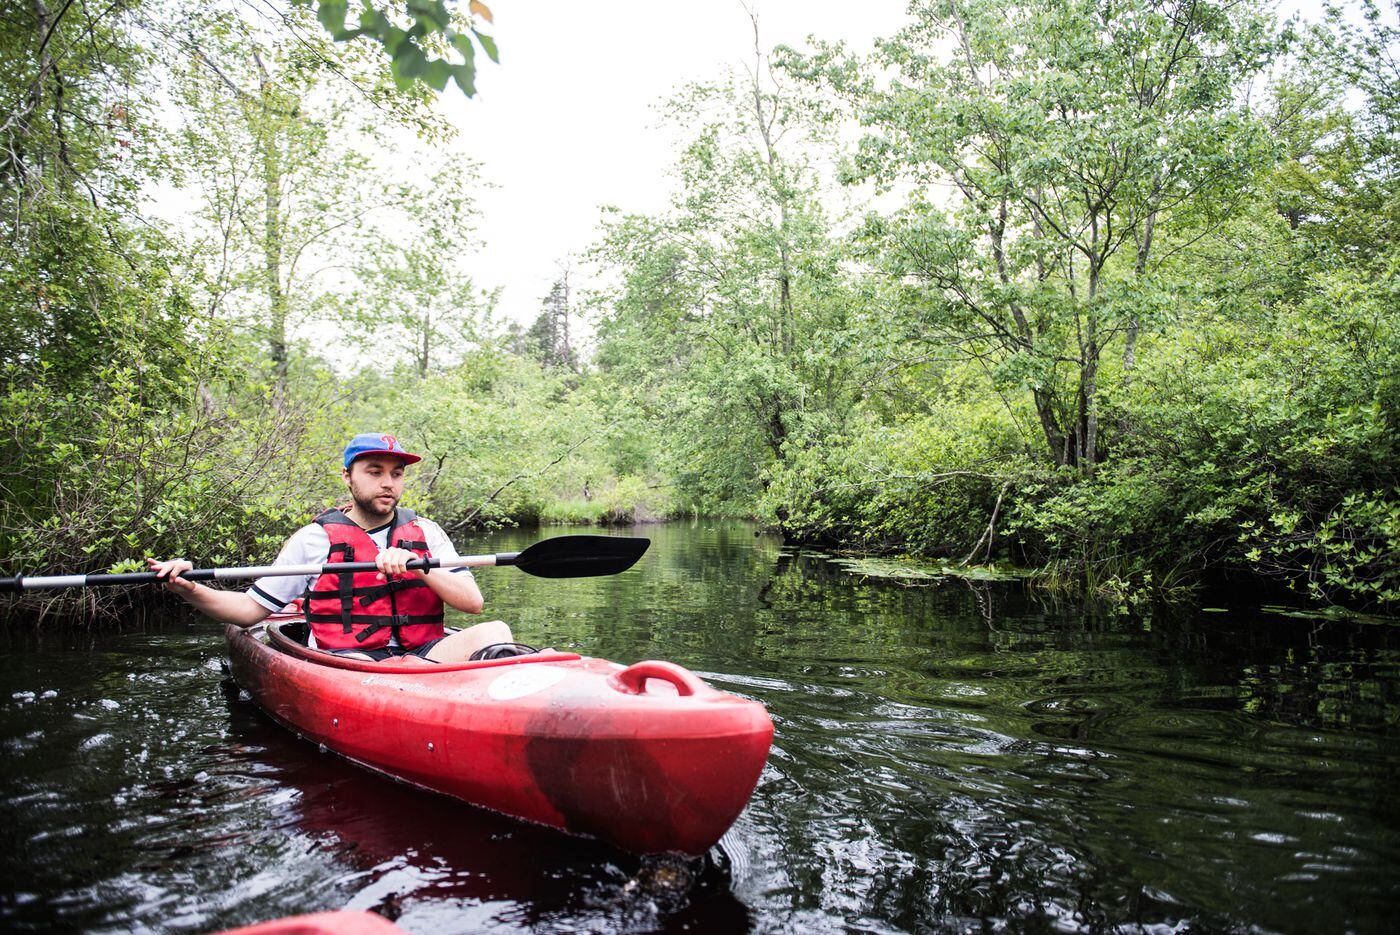 Where to rent and use kayaks and canoes in and near ...